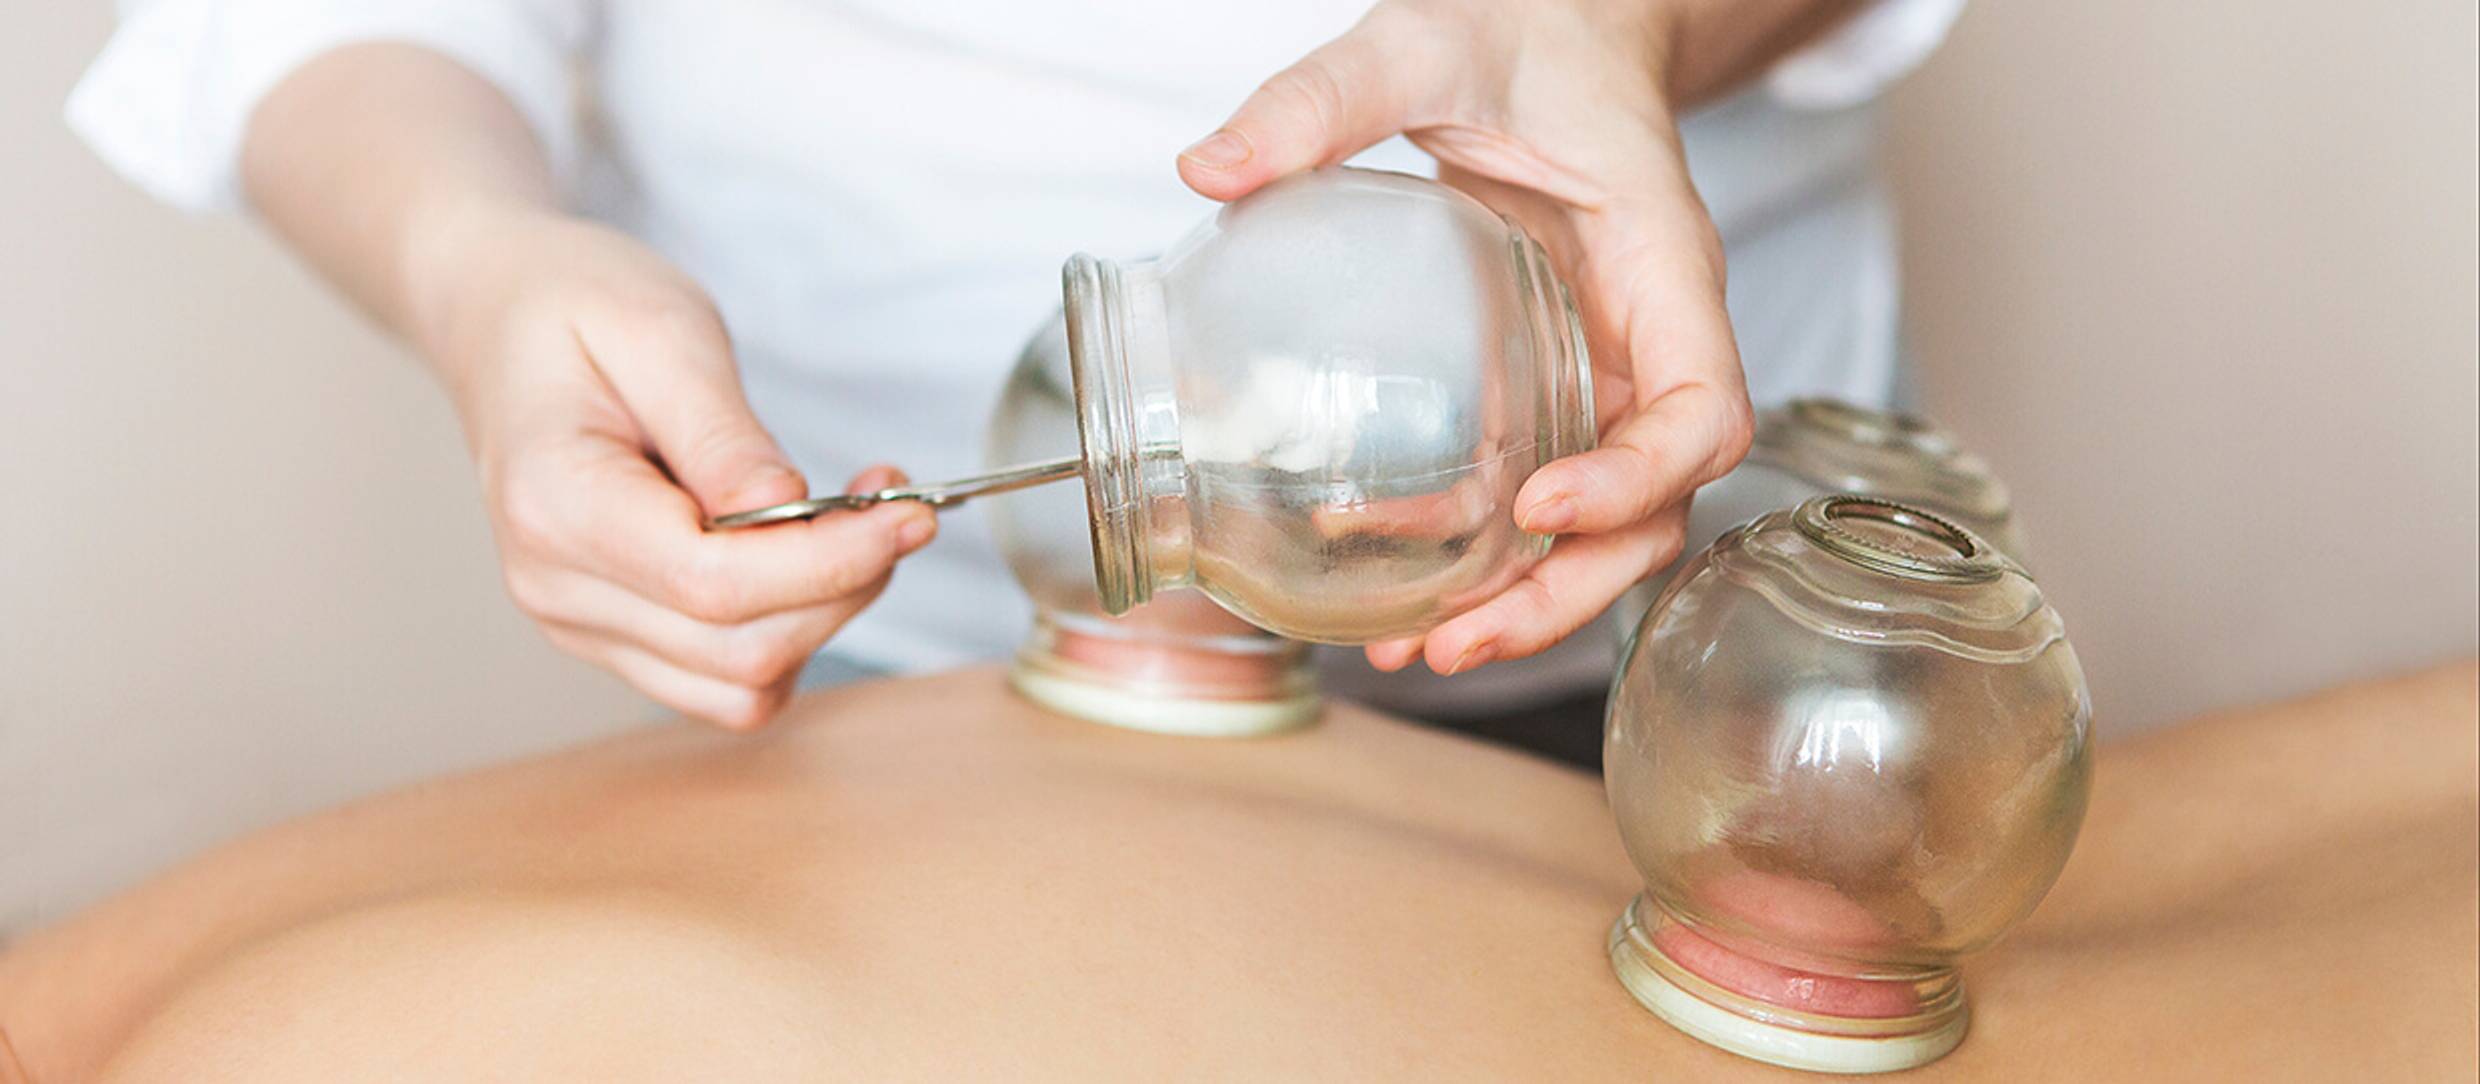 Cupping Therapist placing glass cups on patient